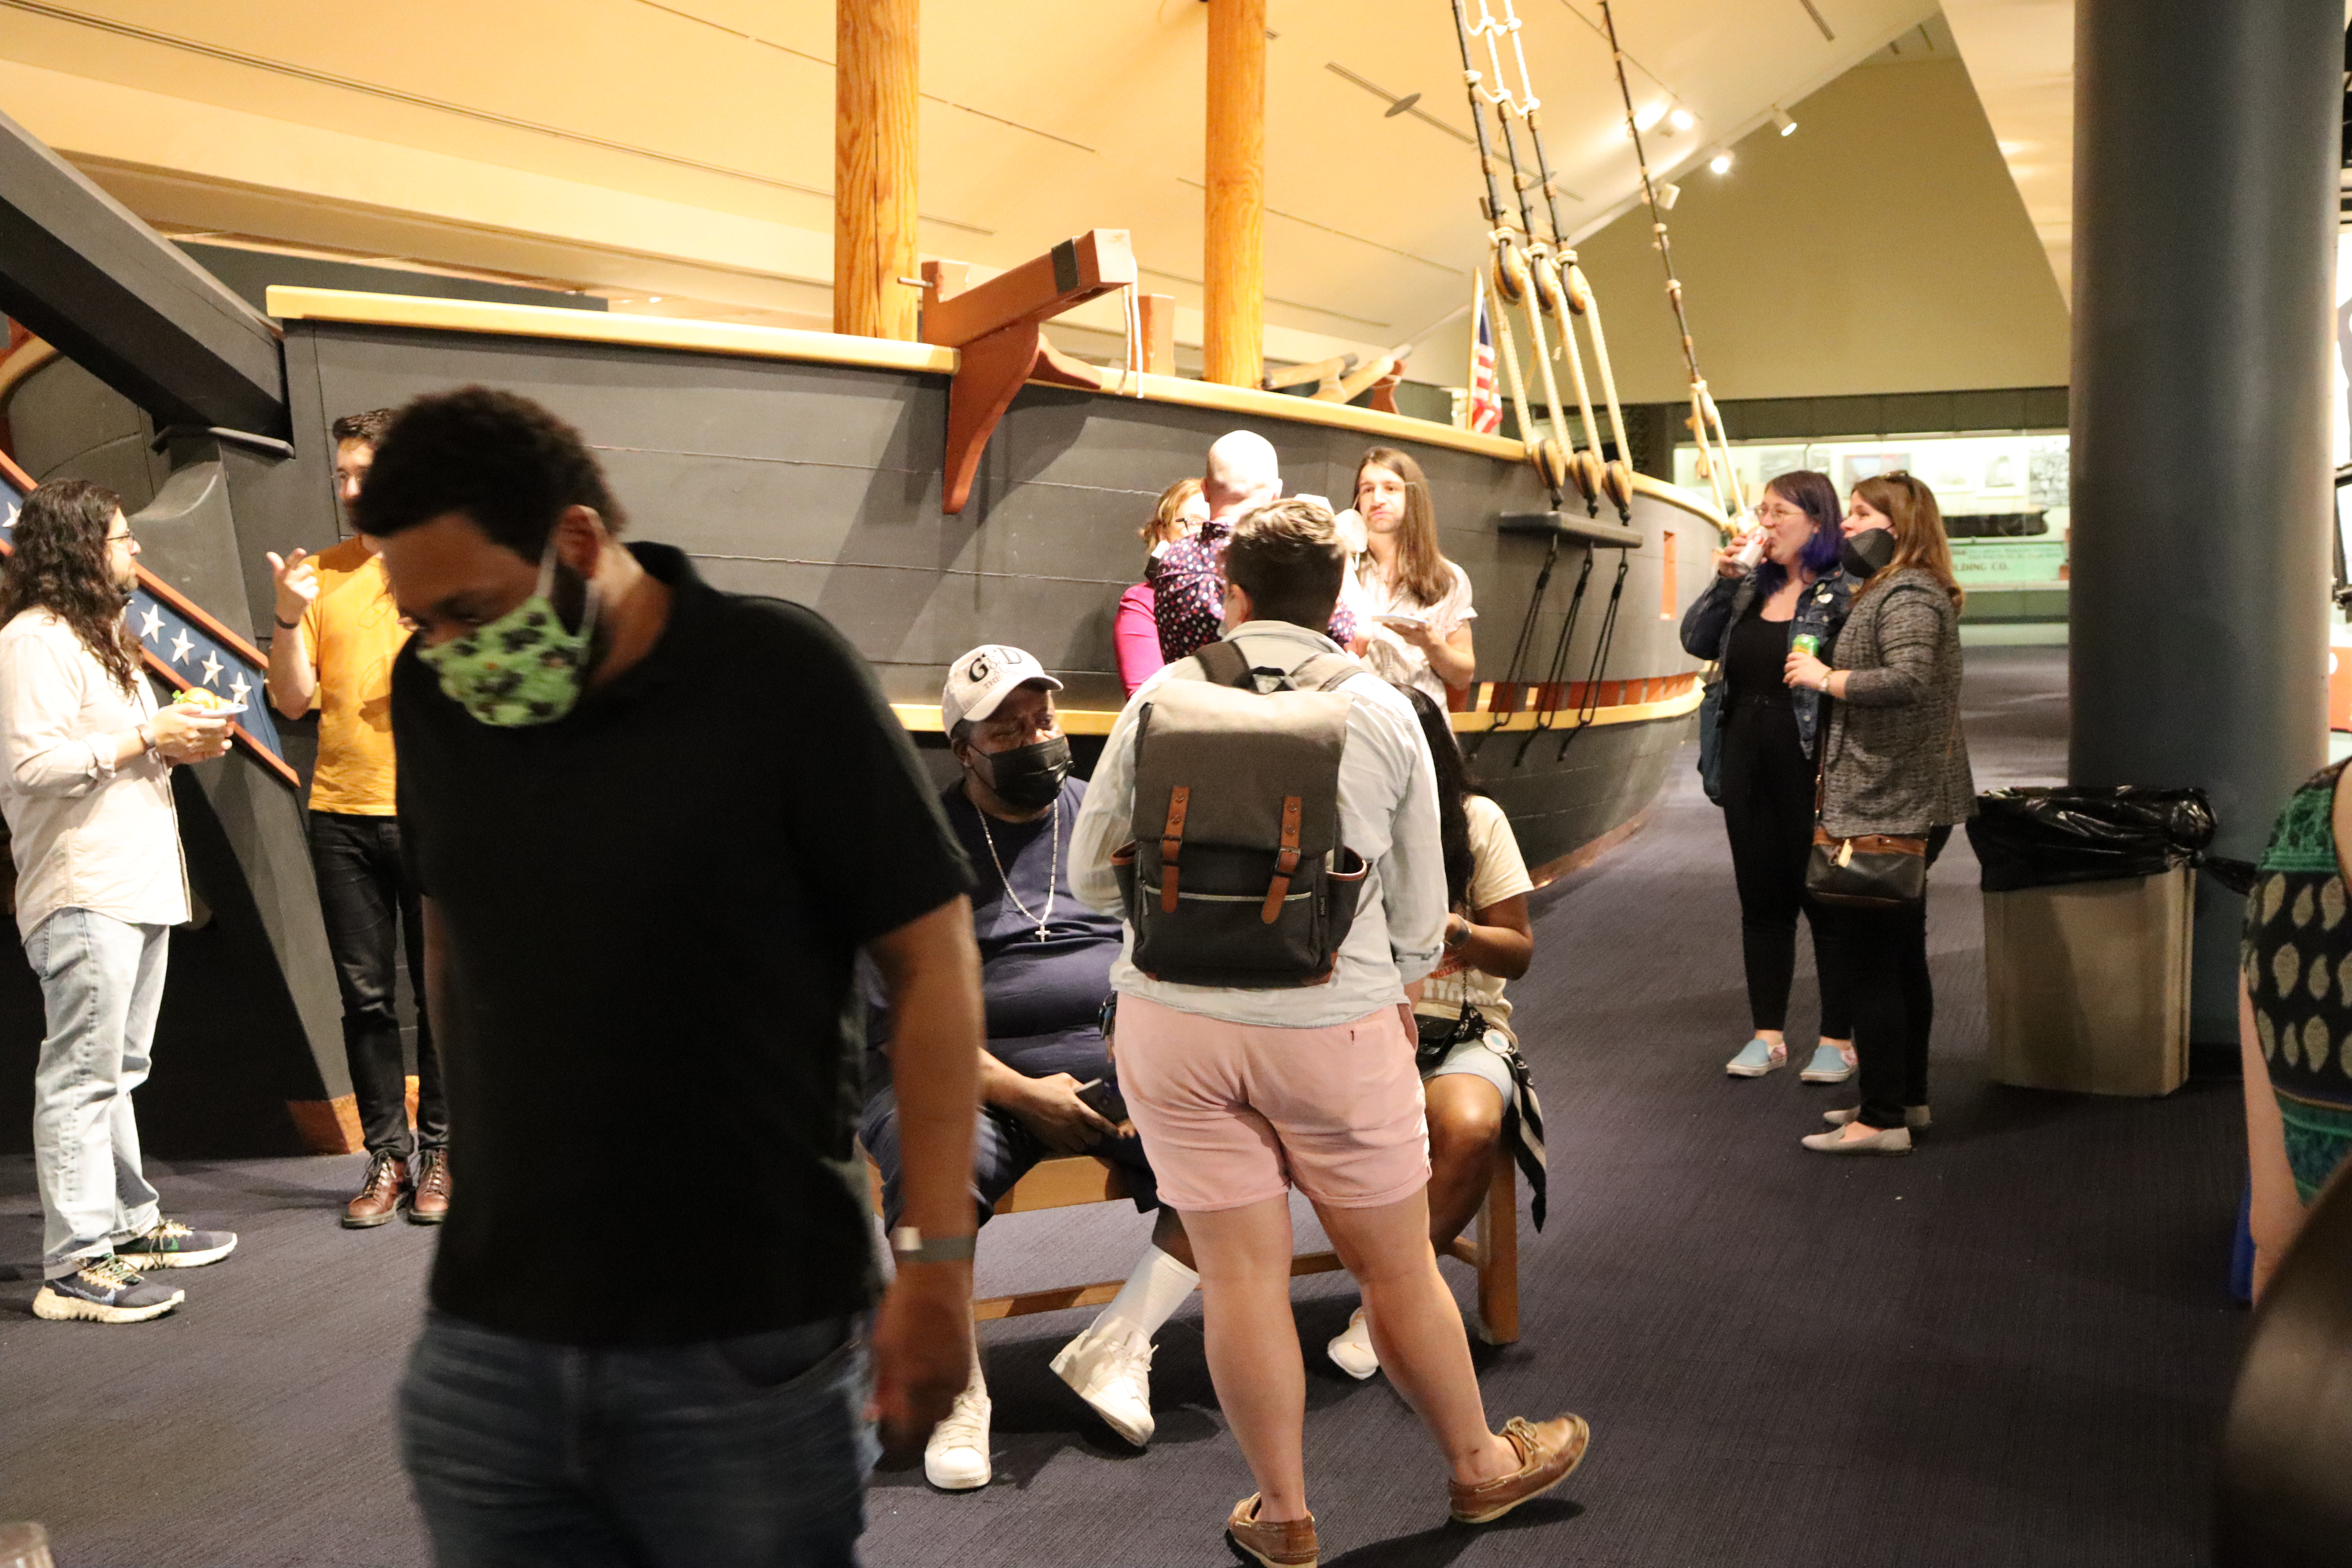 Visitors to a museum mingle in a gallery with a display of a historic boat.